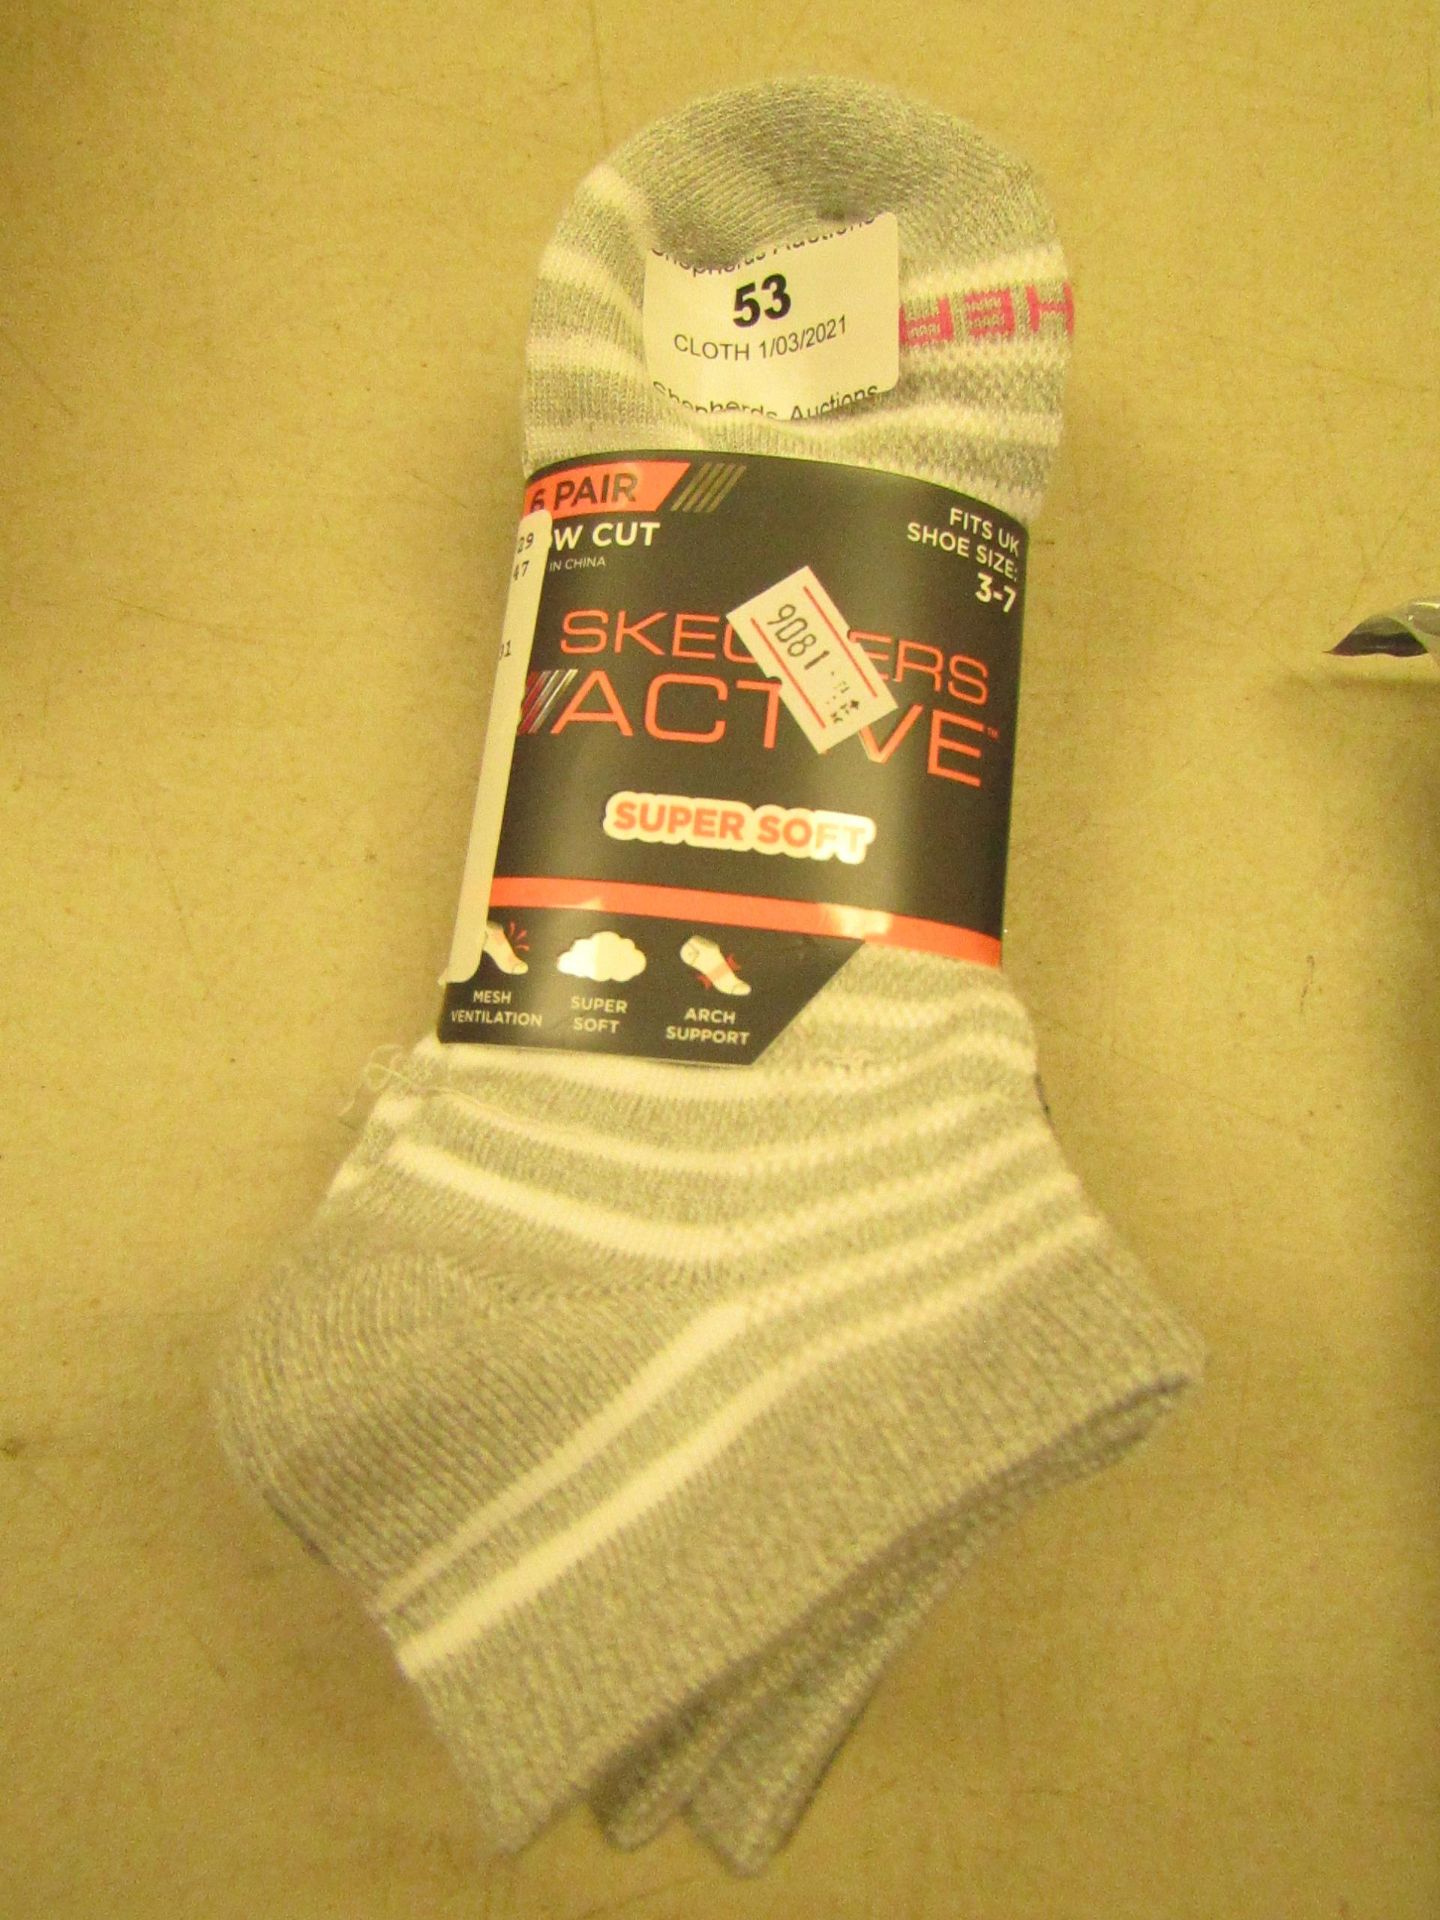 6 x pair of Skechers Active Super Soft Low Cut Socks size 3-7 new & packaged